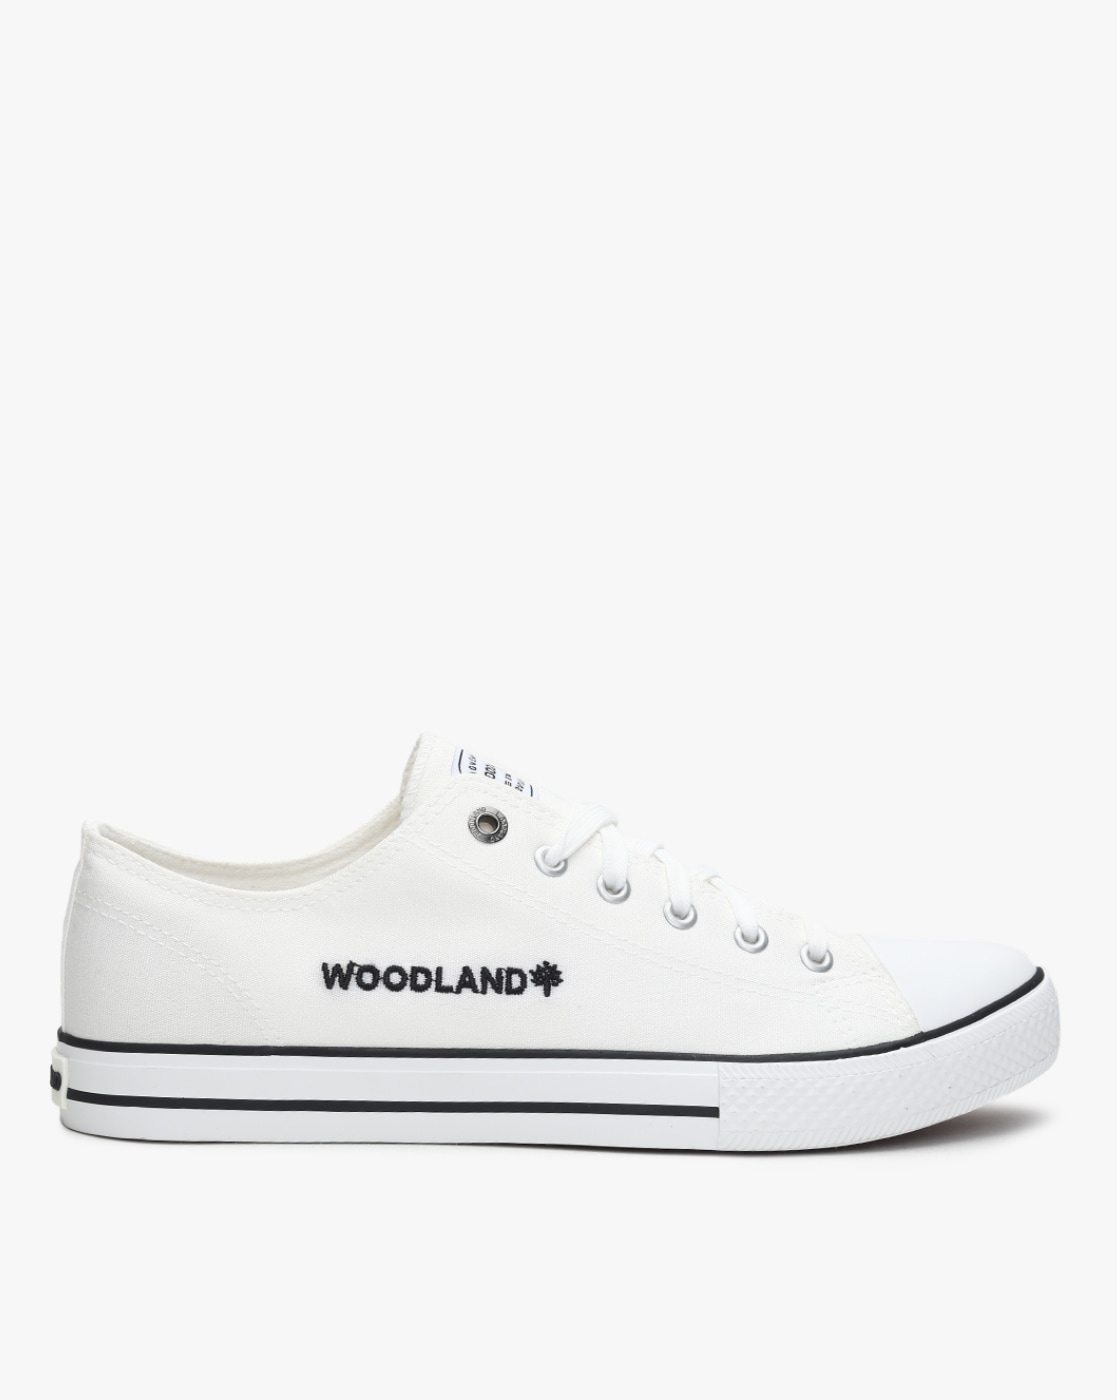 Reveal more than 175 woodland white sneakers